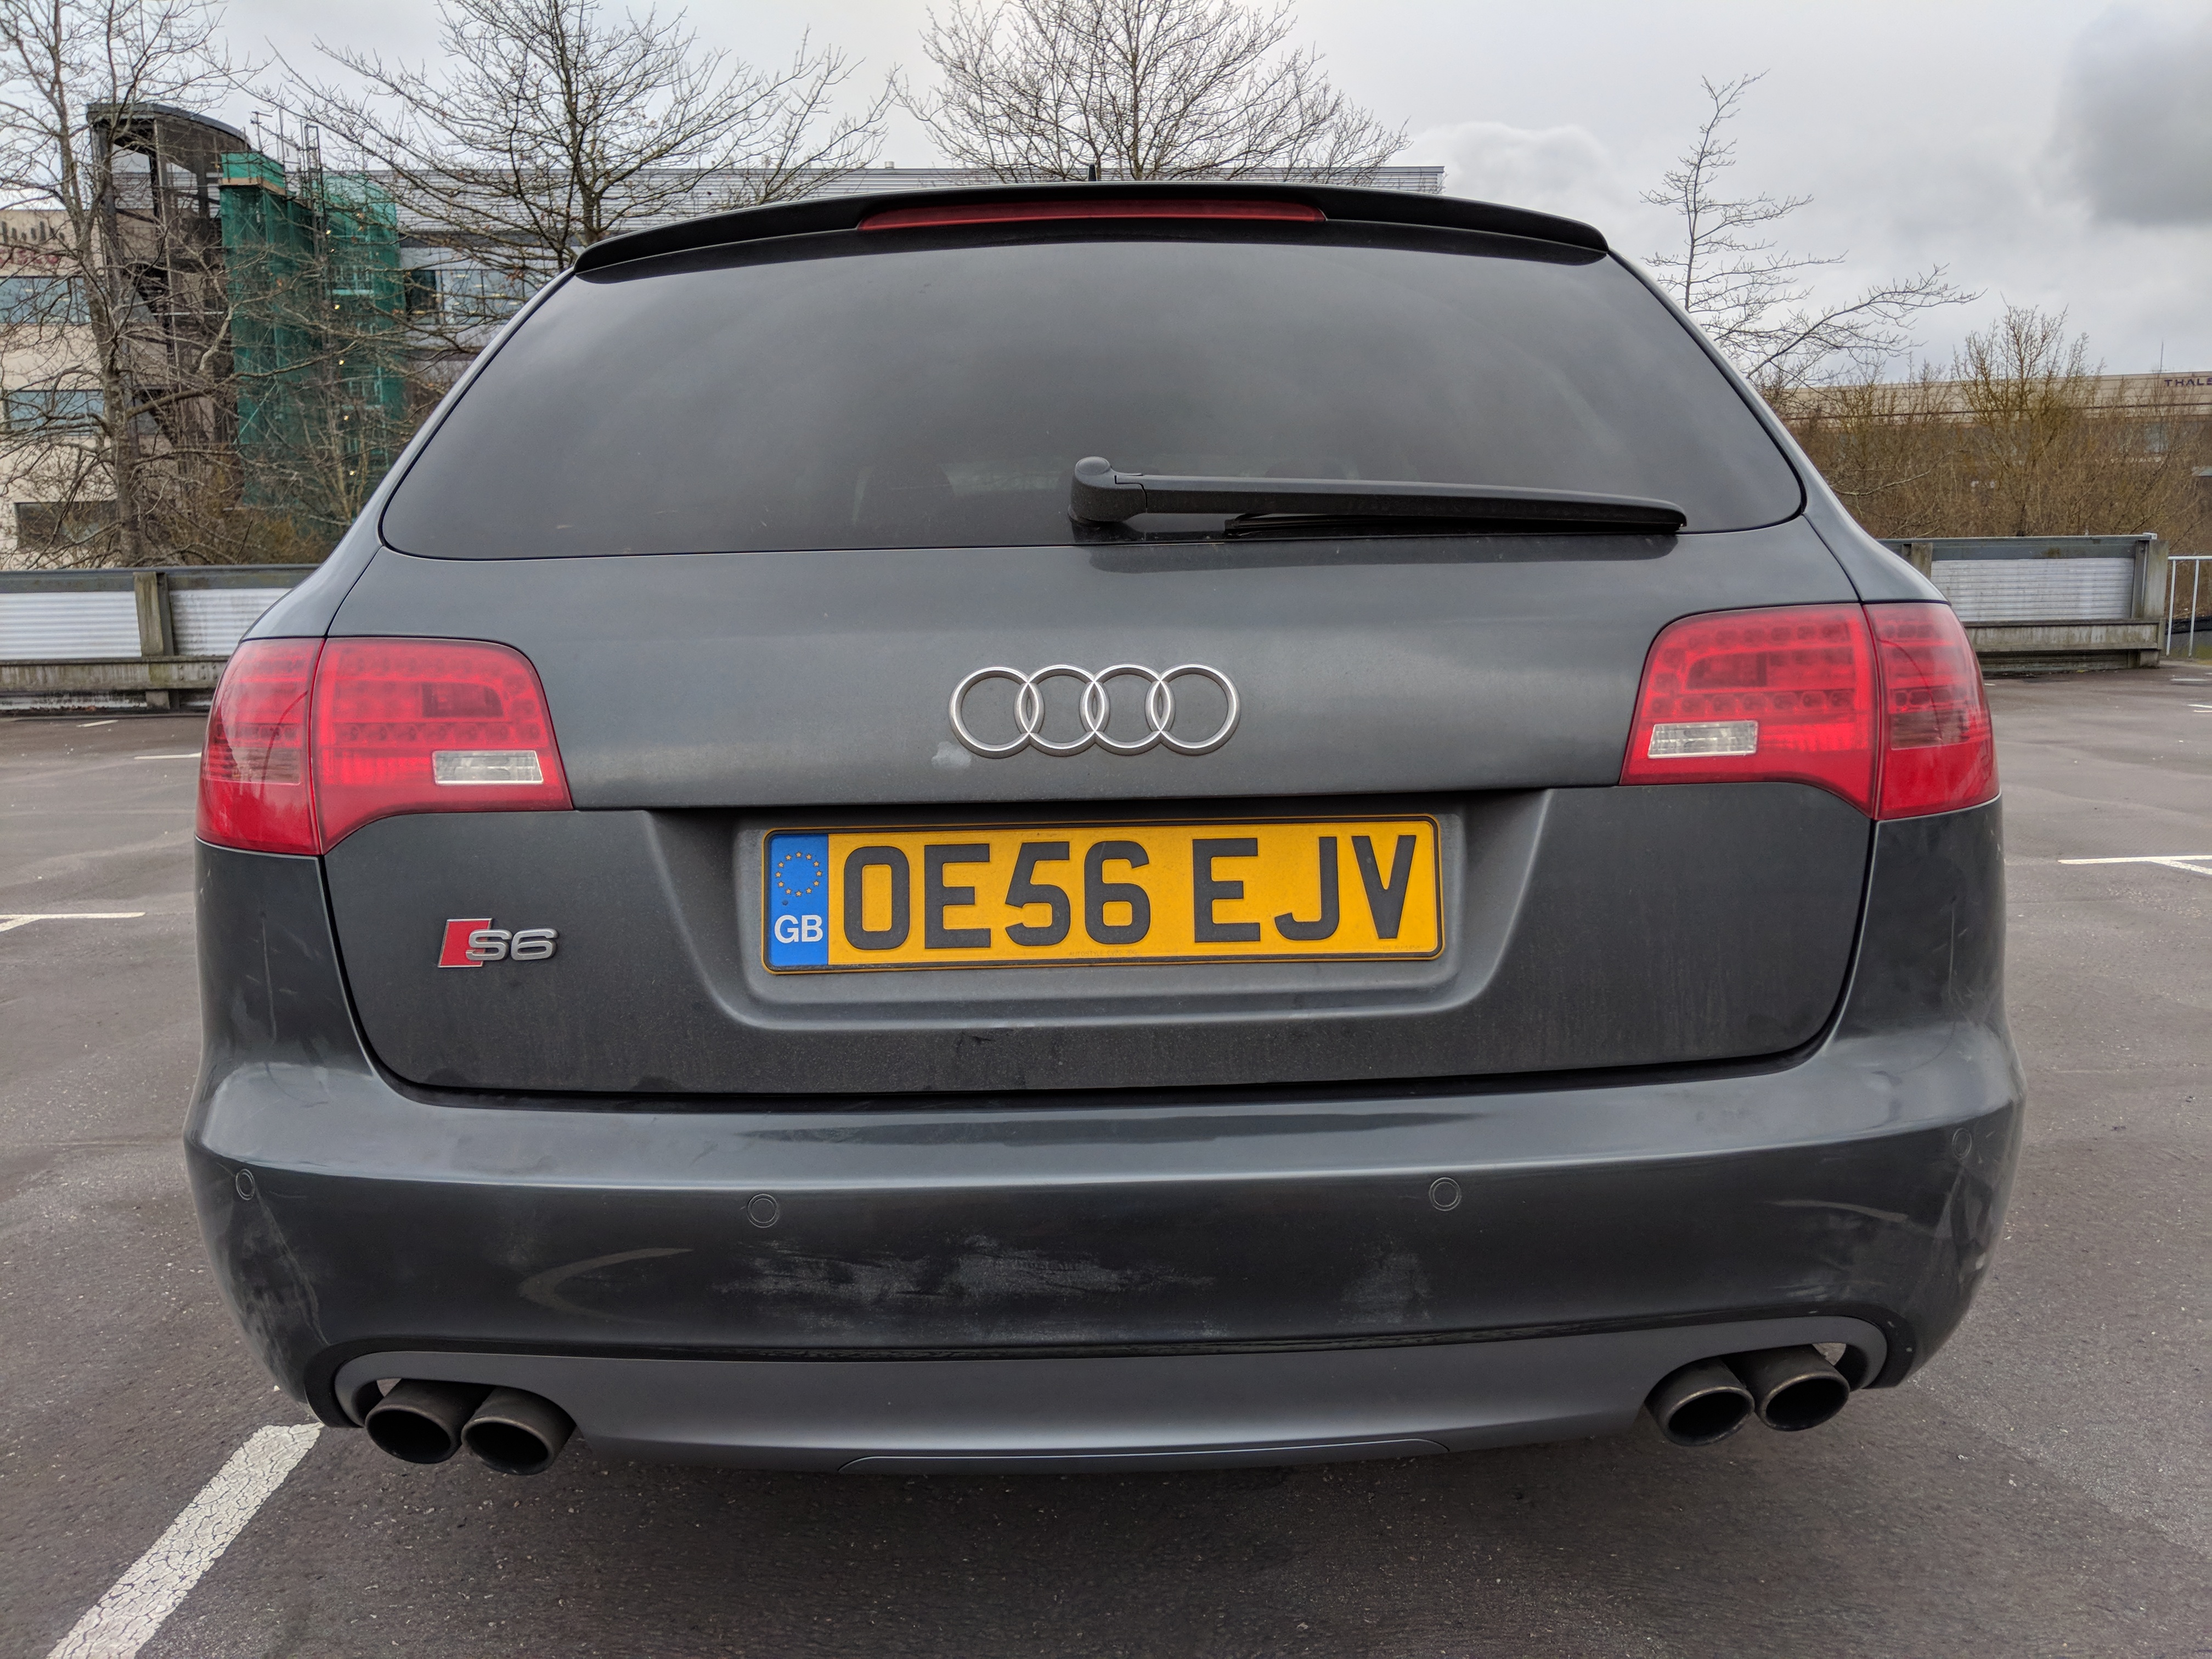 New Family Car - Audi S6 V10 Content - Page 4 - Readers' Cars - PistonHeads